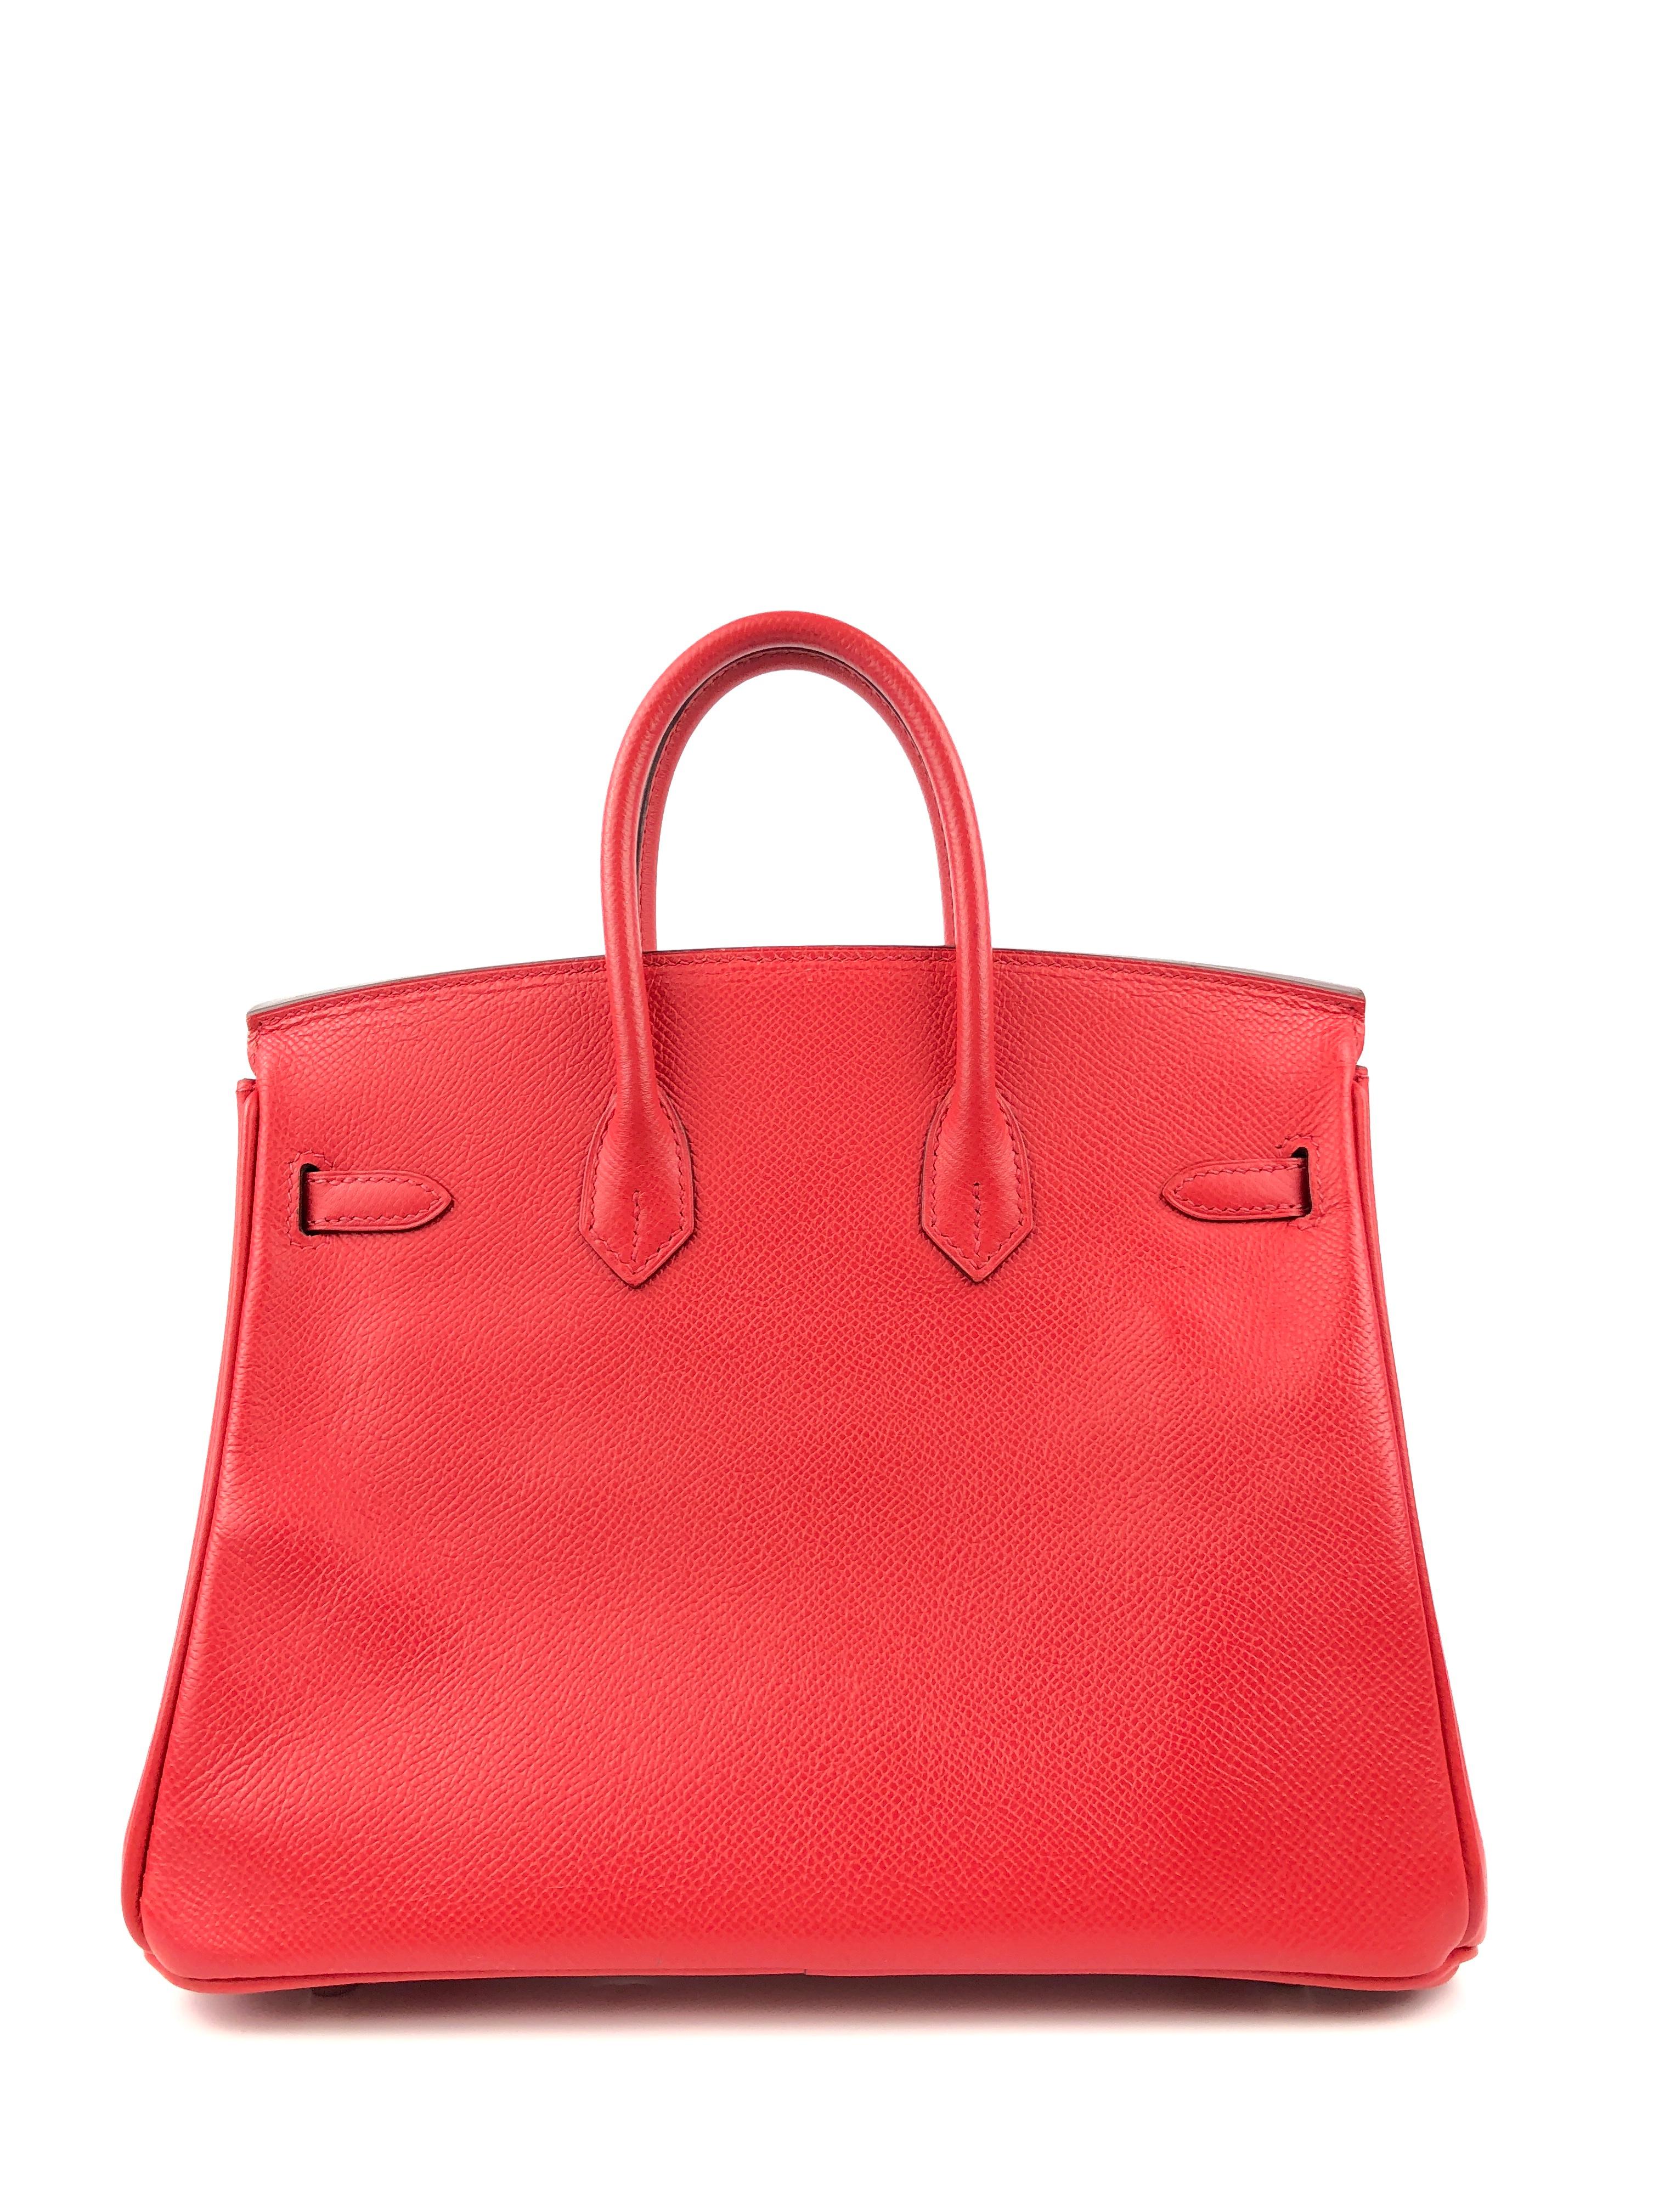 This authentic Hermès 25 cm Epsom Bougainvillea Birkin is in pristine condition.  A vibrant pinky red, Bougainvillea adds excitement to any ensemble.  Very hard to find in the 25 cm silhouette, this piece is a must have for collectors.
Textured